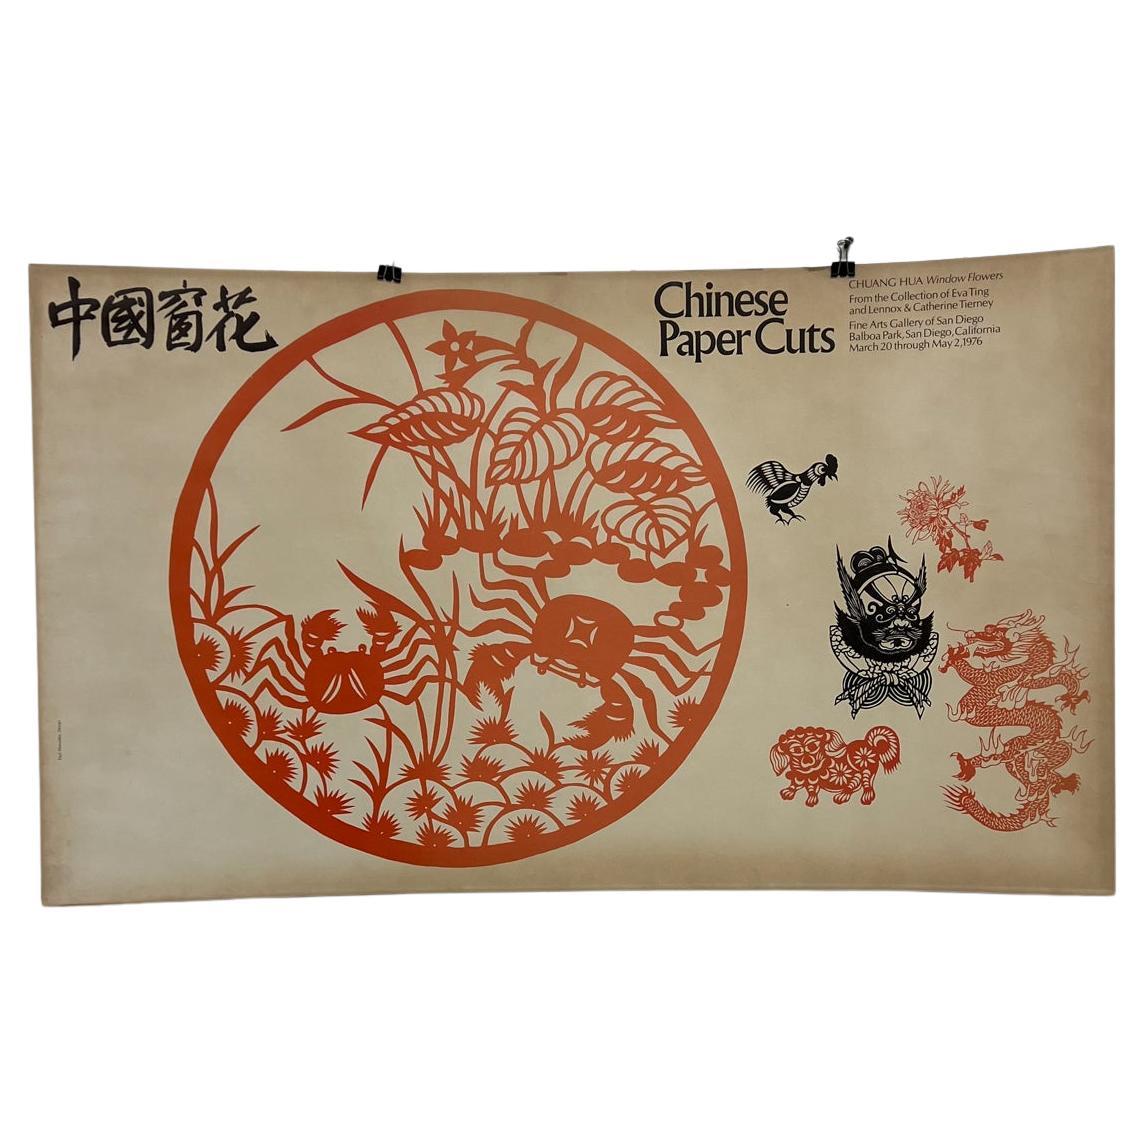 1970s Pretty Chinese Papercutting Art Window Flower Chuang Hua For Sale